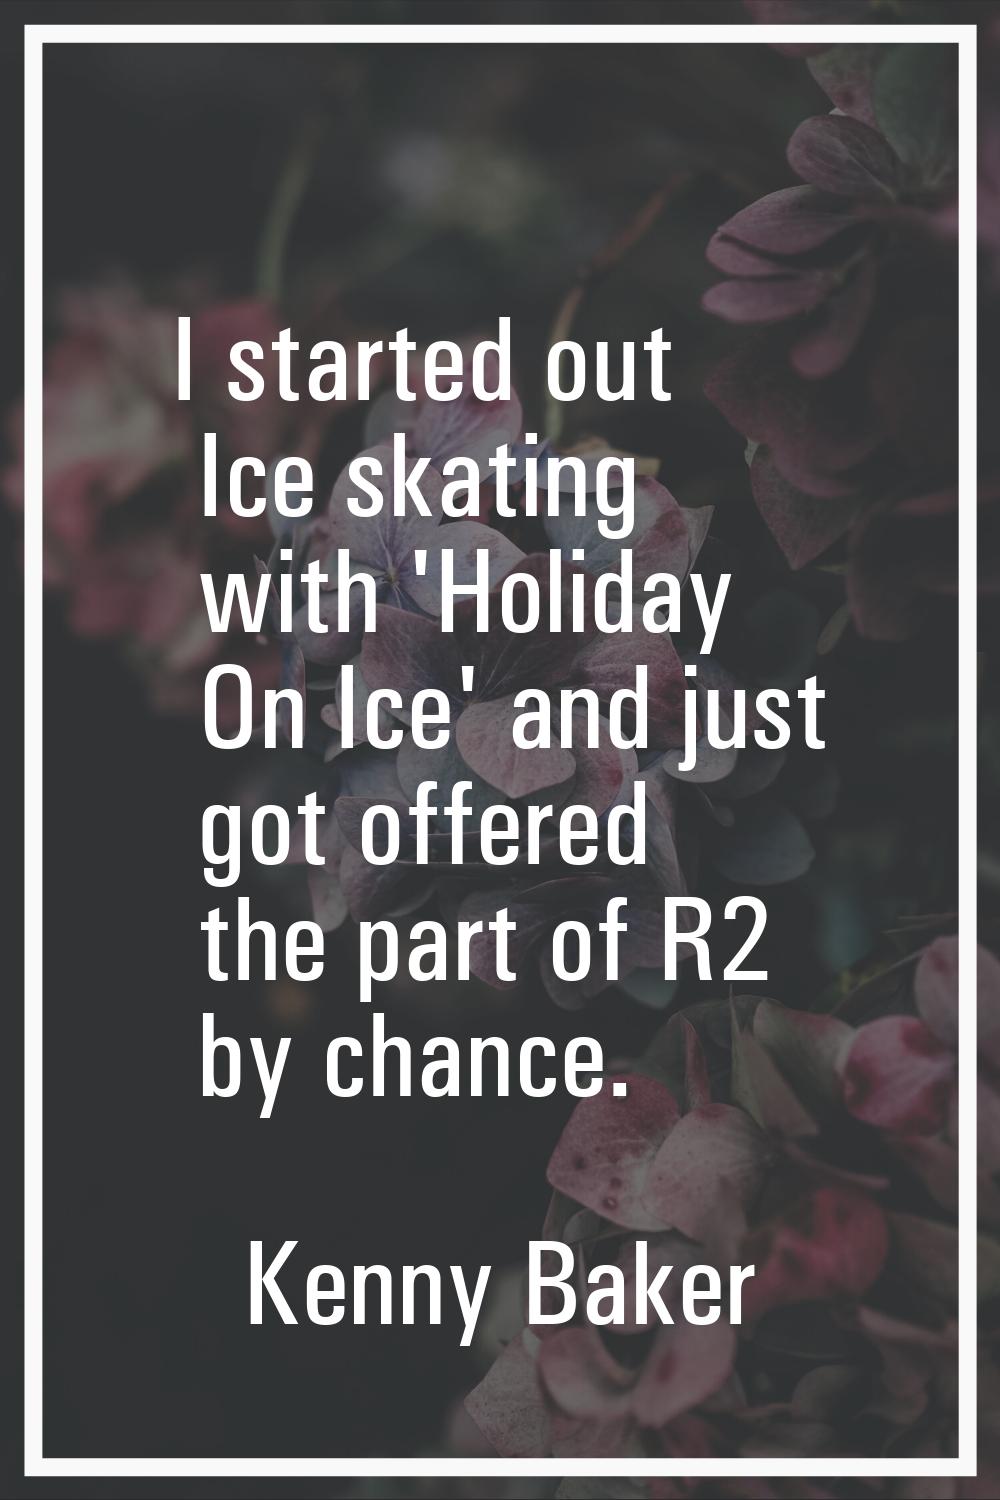 I started out Ice skating with 'Holiday On Ice' and just got offered the part of R2 by chance.